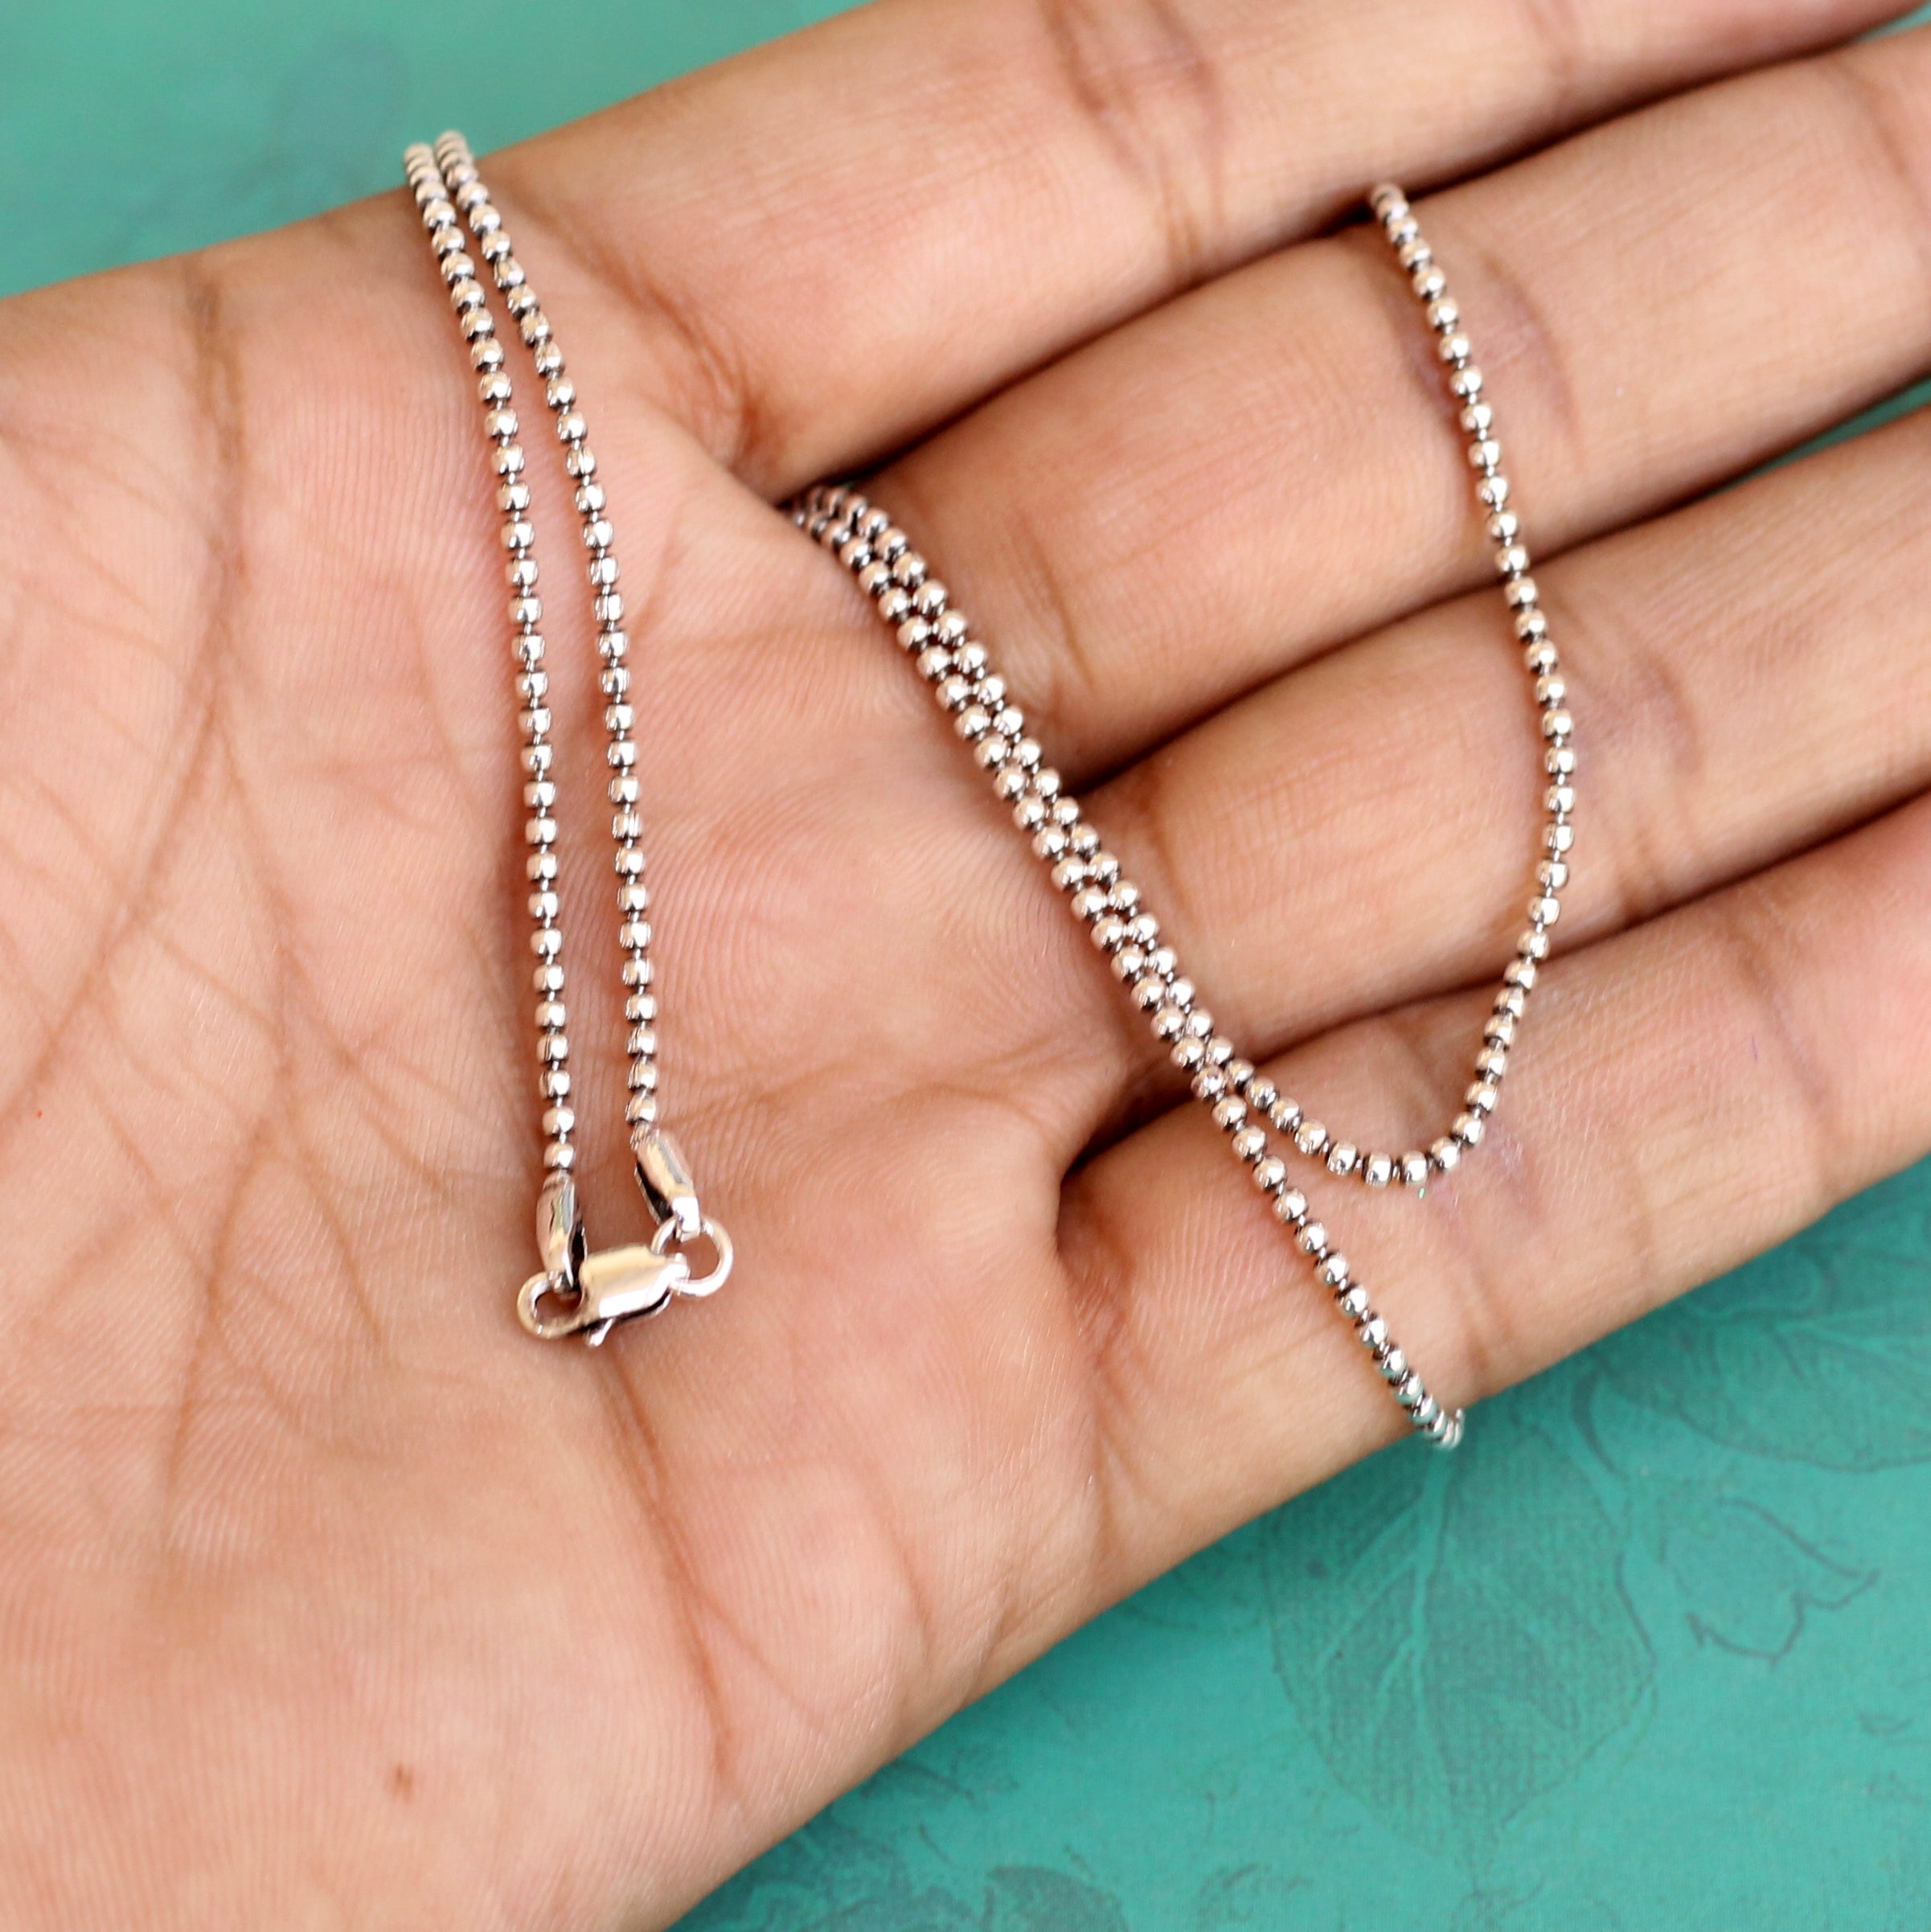 Silver Bead Necklace - Etsy